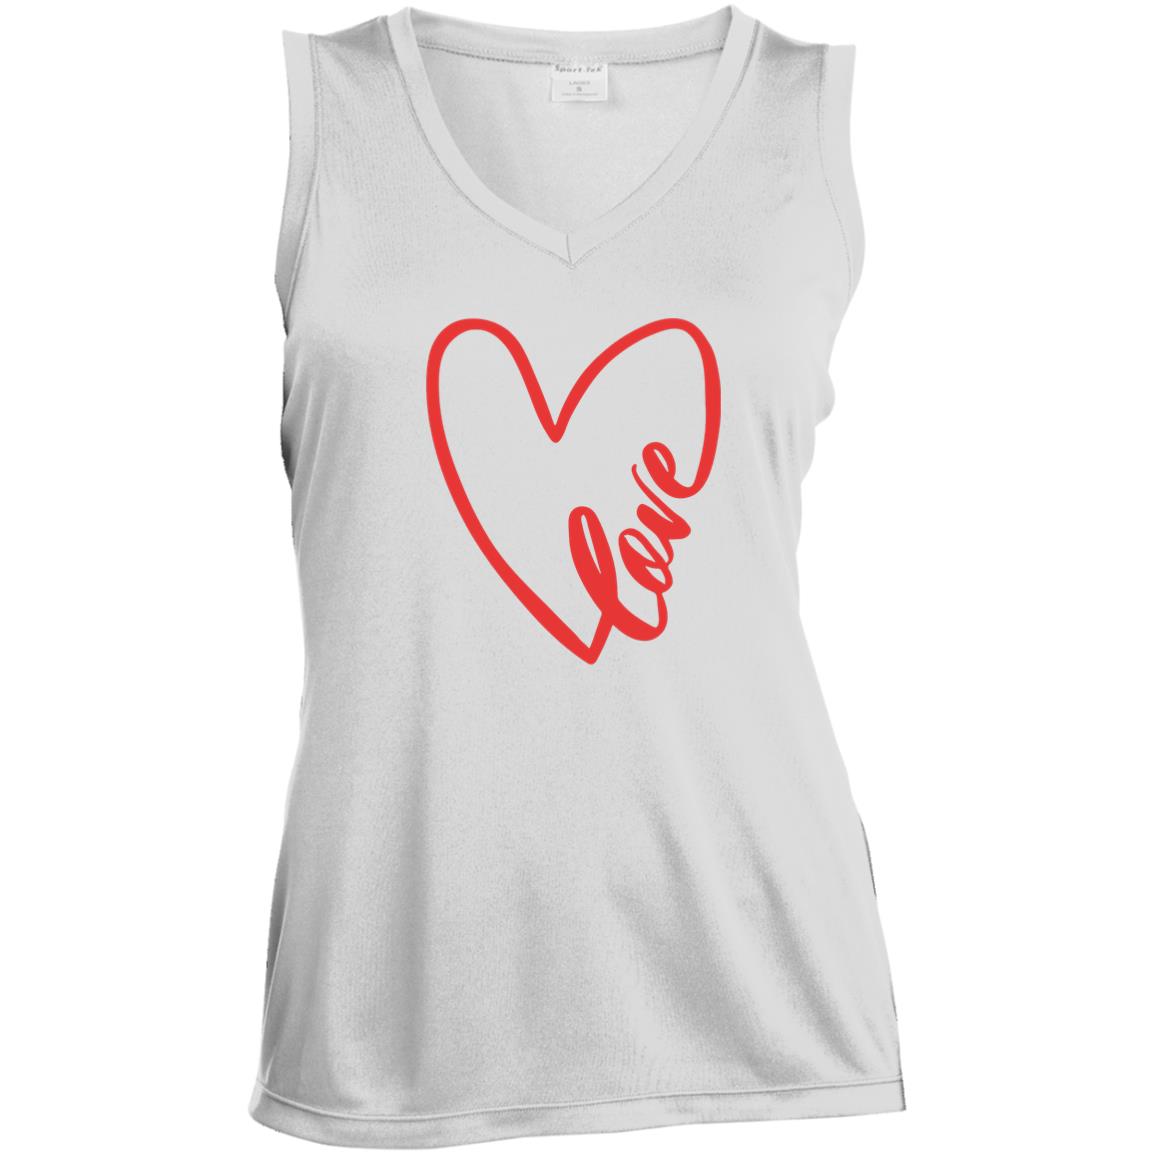 white performance tank with heart and word "love" written into the heart outline